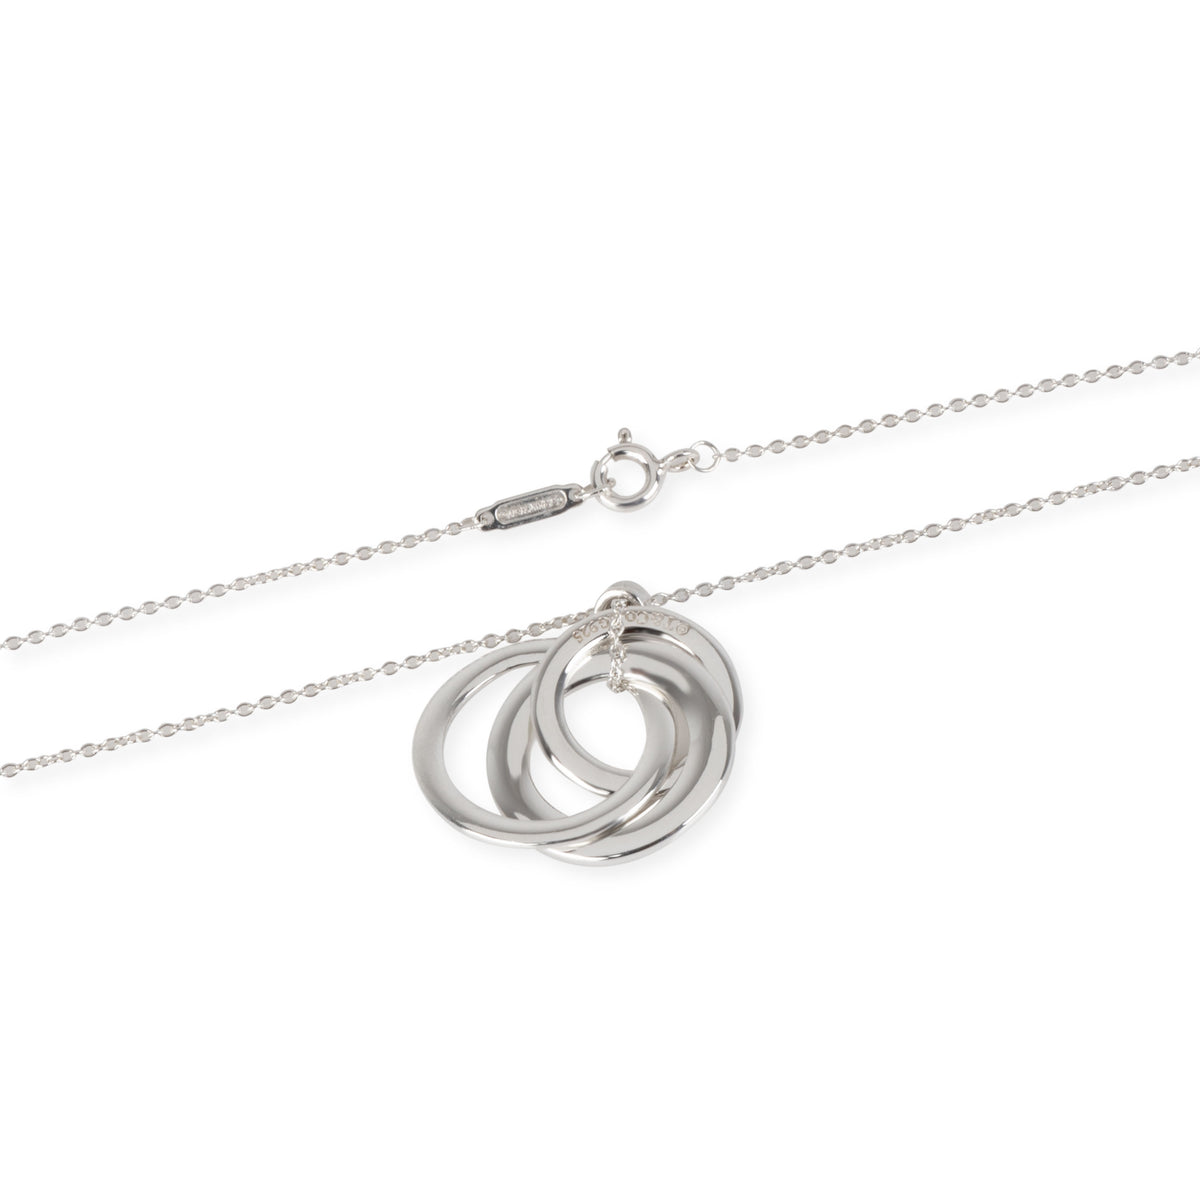 Tiffany & Co. Tiffany 1837 Interlocking Circles Necklace in  Sterling Silver